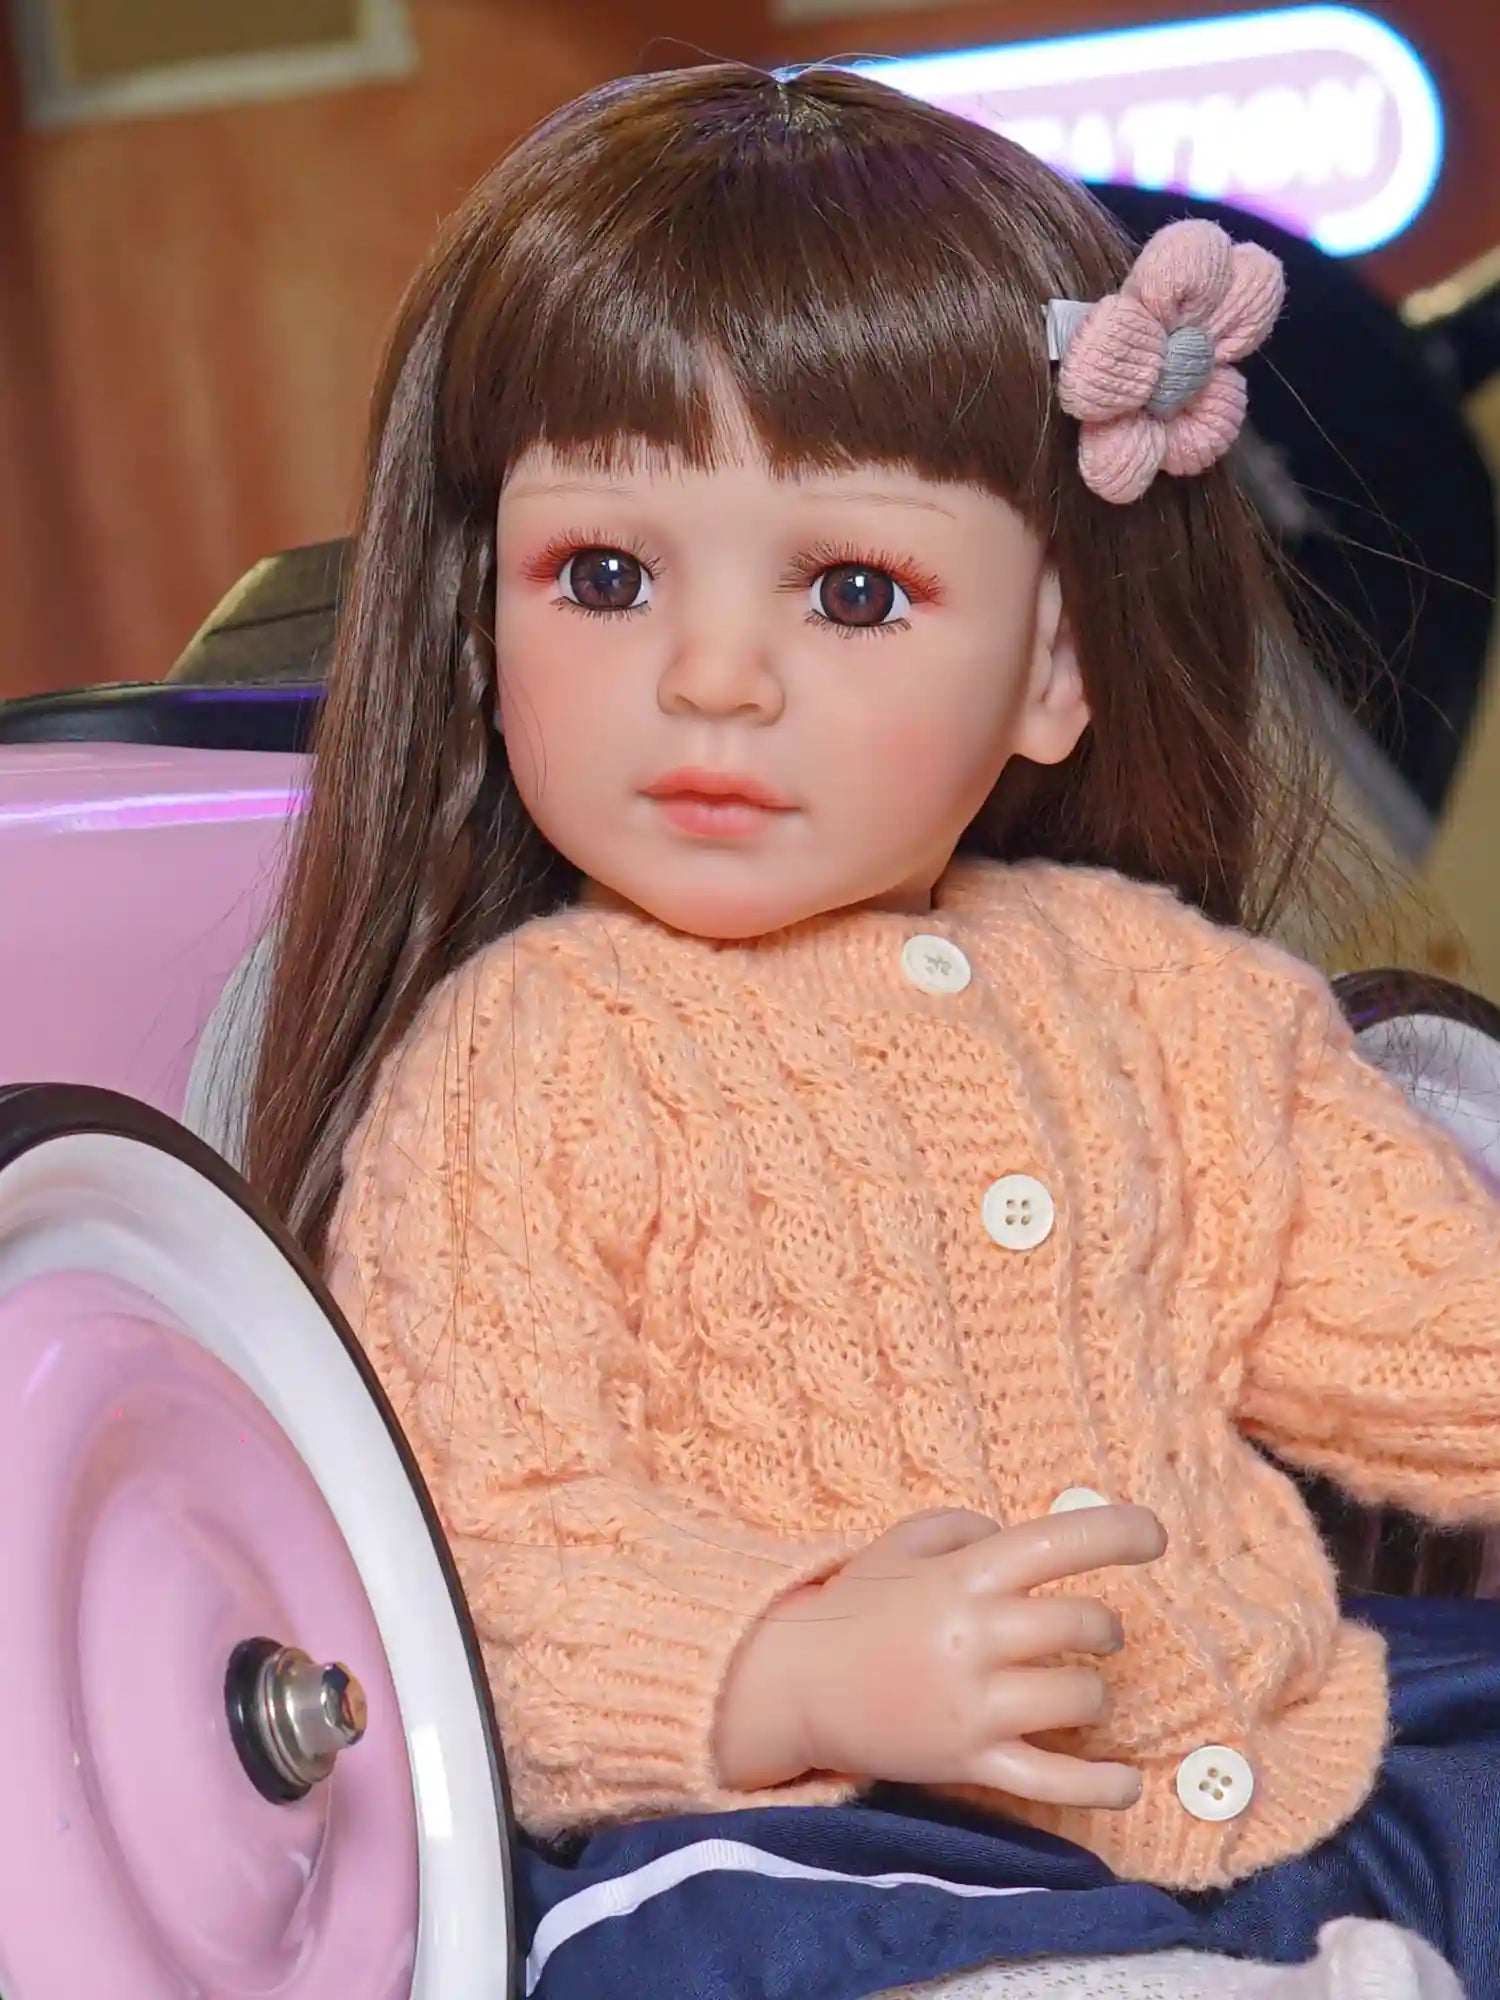 Lifelike doll with soft brown hair and expressive eyes, in a cozy knitted sweater and navy pants, in a playroom.